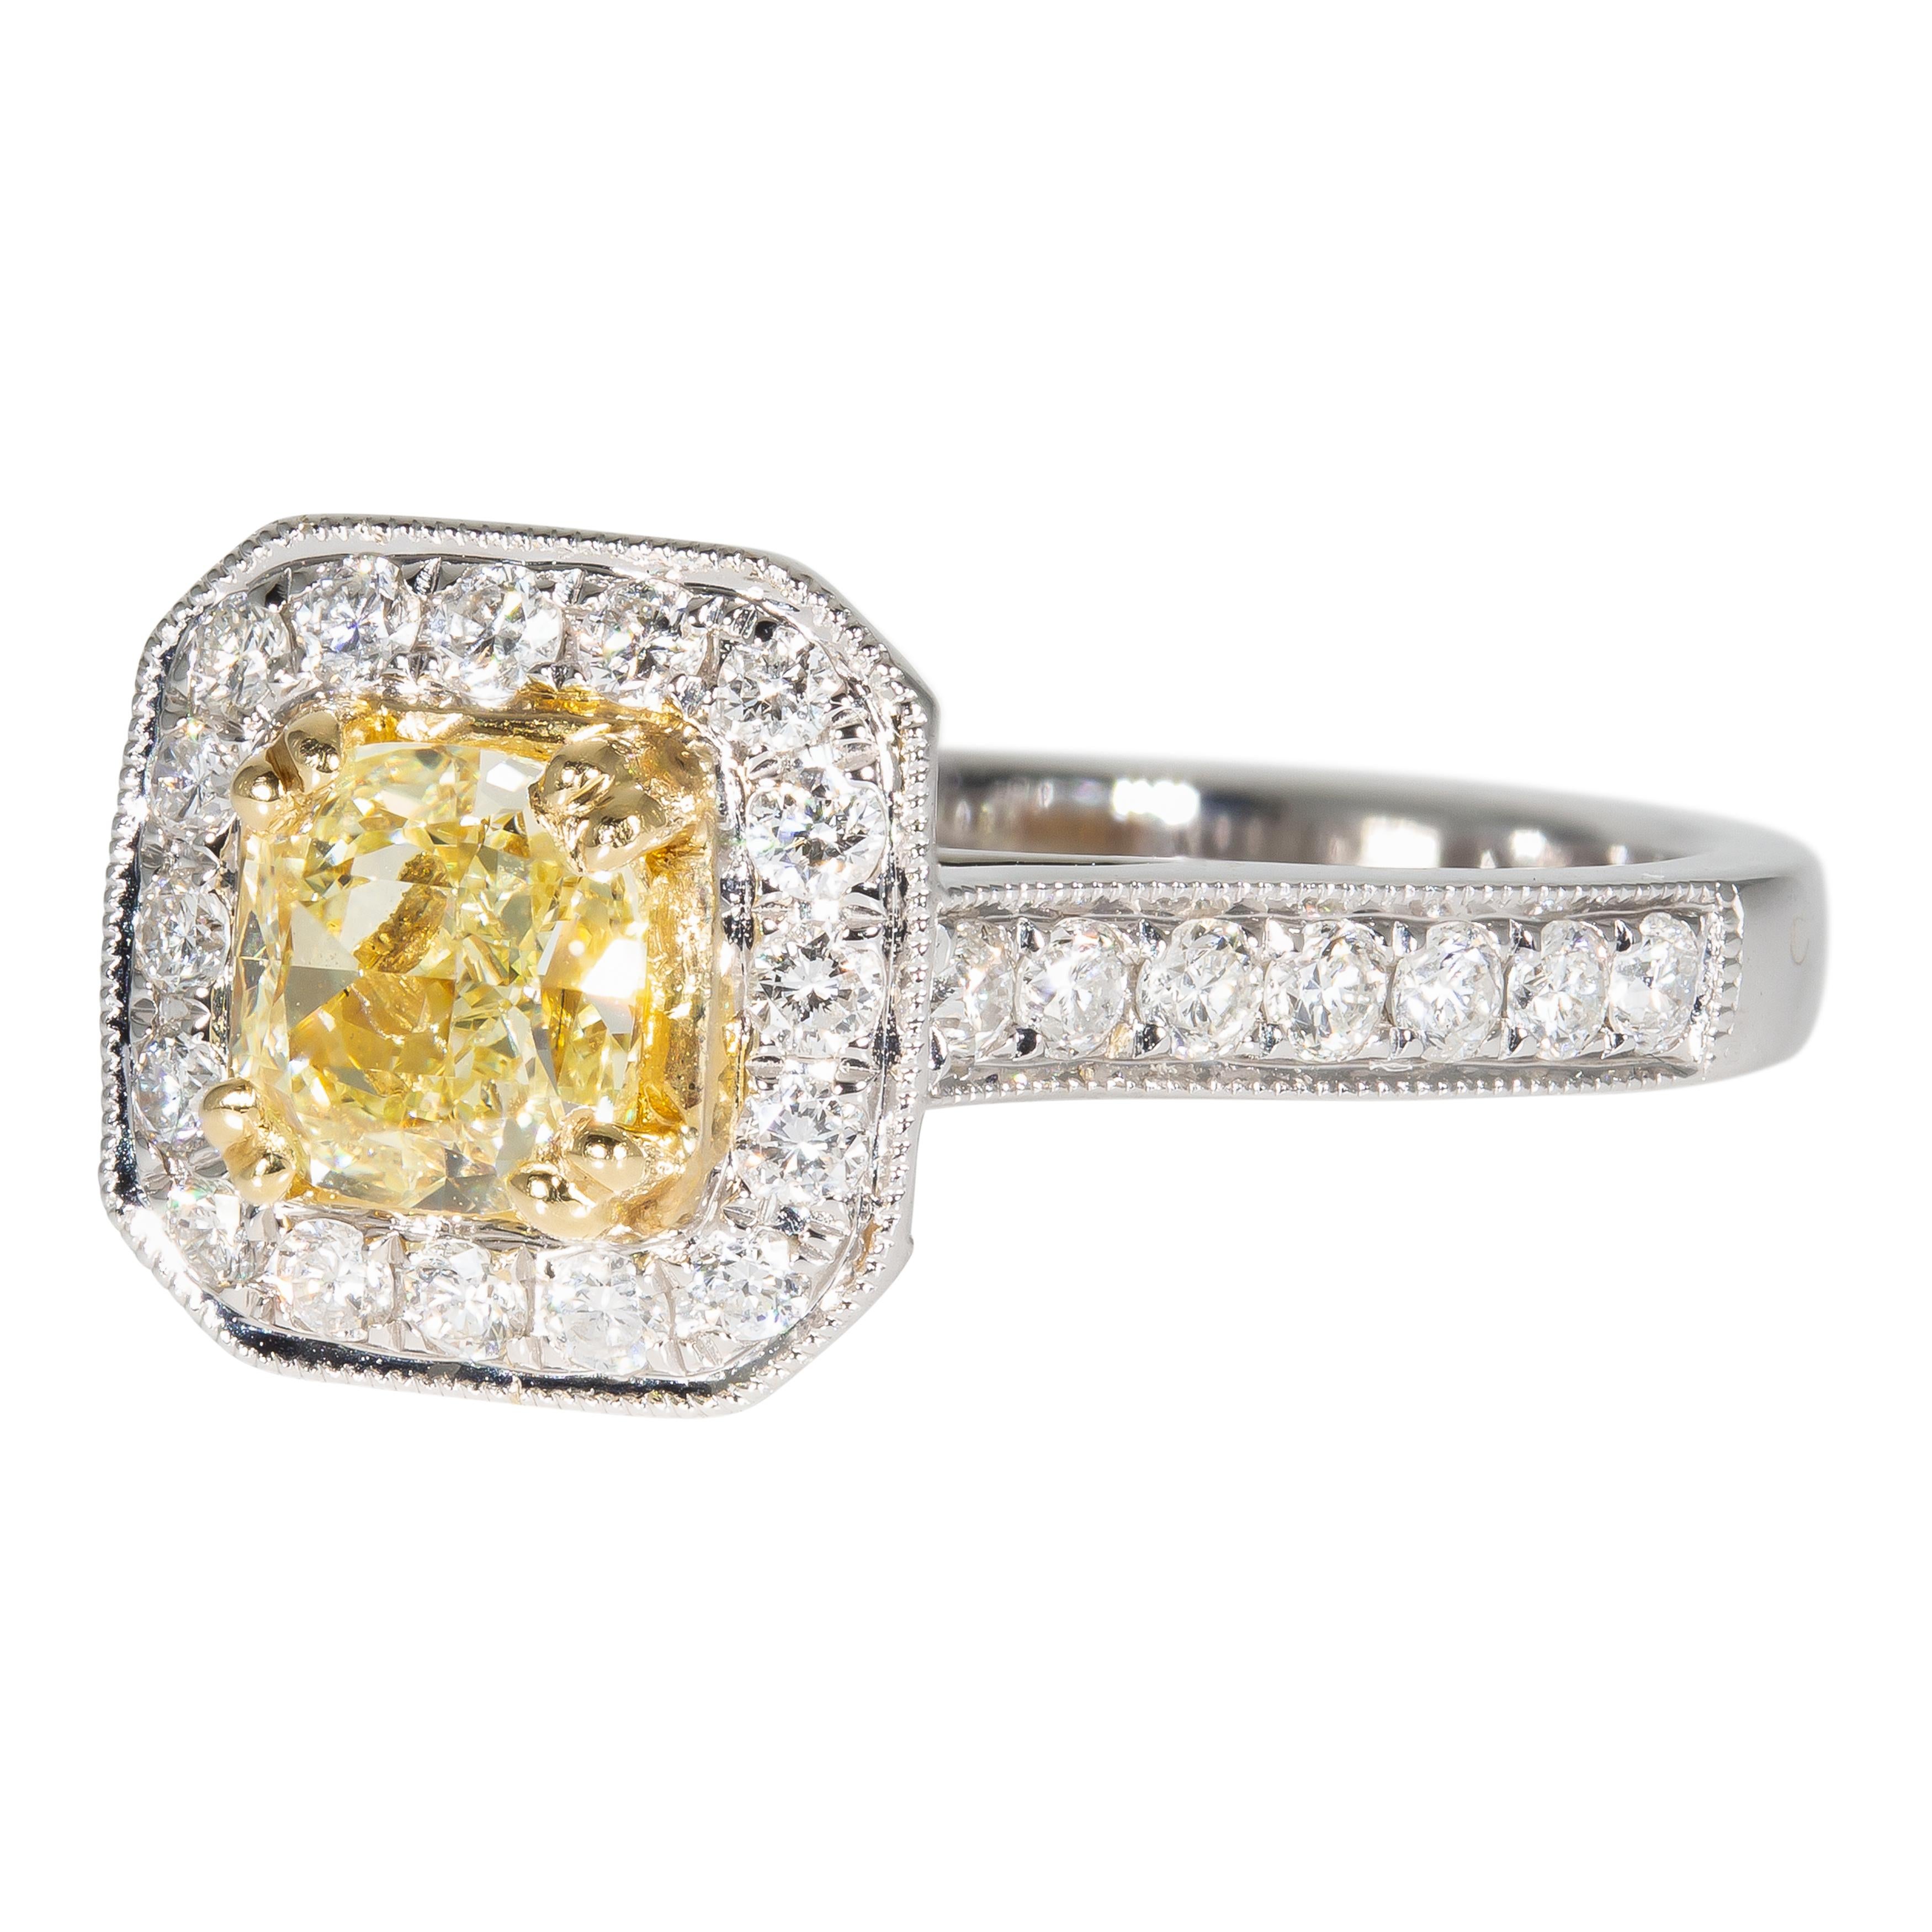 Beautiful 18 karat white gold ring with yellow gold accents containing a 0.71 carat prong set radiant brilliant natural diamond center stone with 42 pave set and two bezel set natural diamond side stones. The total weight of the 44 diamond side